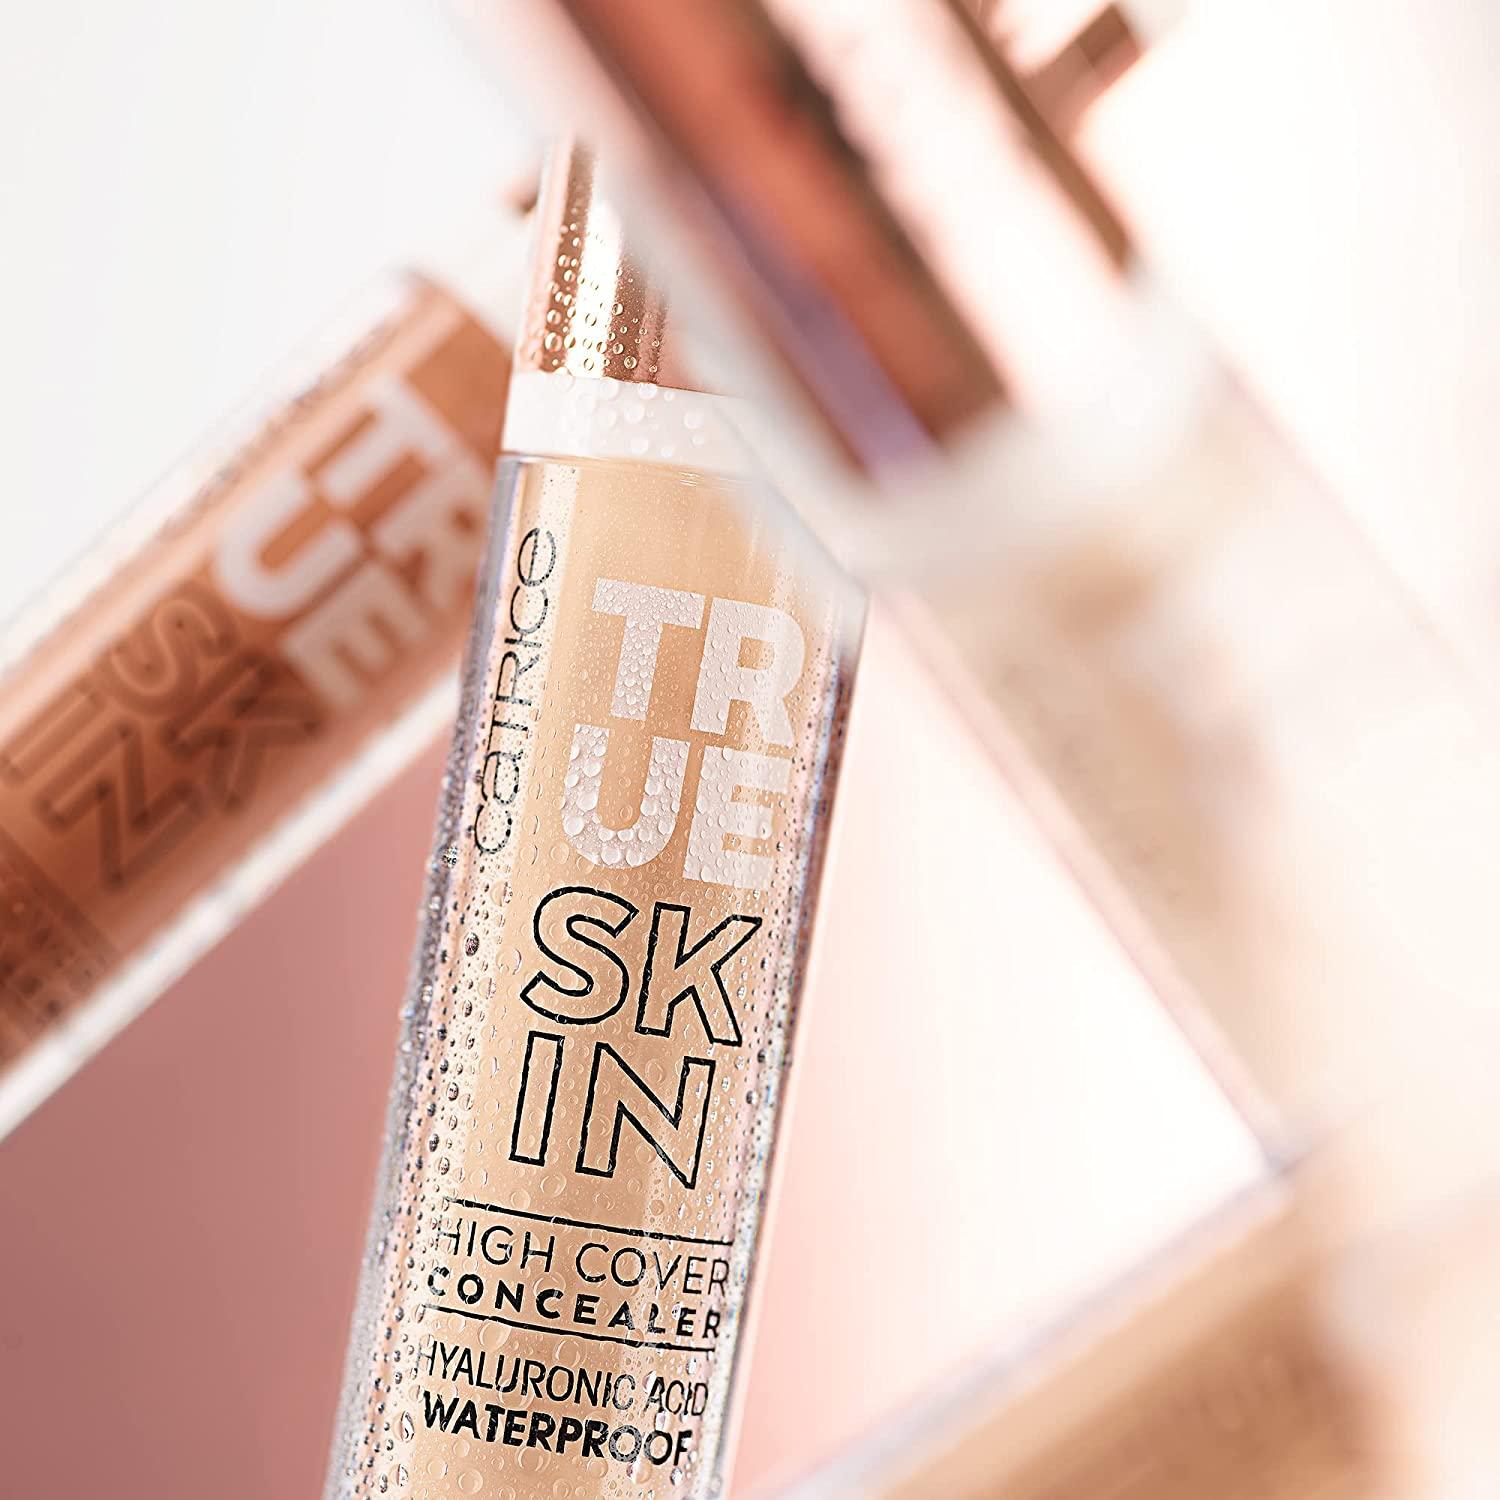 Catrice | True Skin High Cover Concealer | Waterproof & Lightweight for  Soft Matte Look | Contains Hyaluronic Acid & Lasts Up to 18 Hours | Vegan,  Cruelty Free, Gluten Free (001 | Neutral Swan) | Concealer